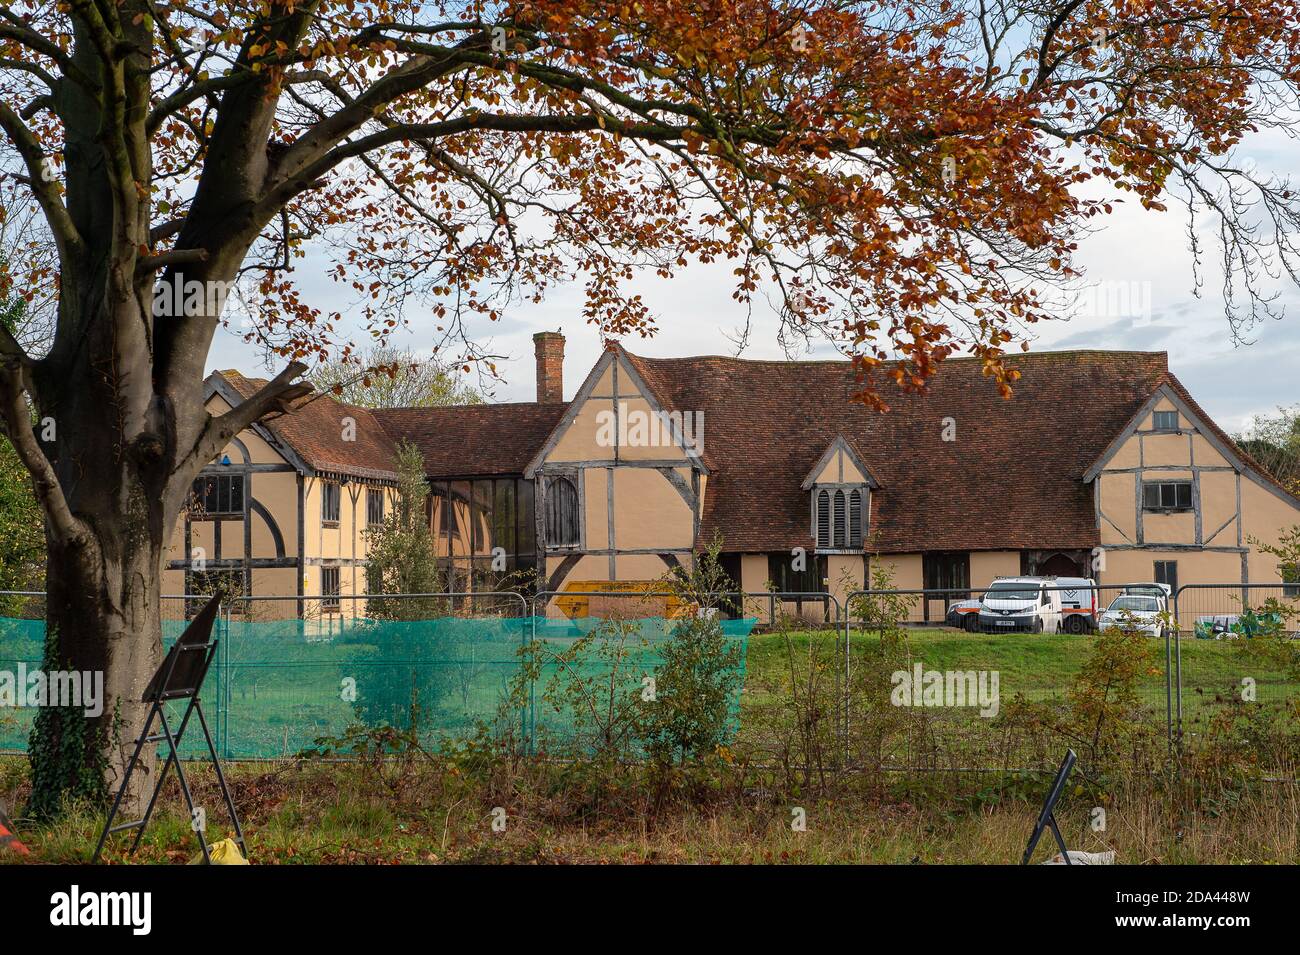 Slough, Berkshire, UK. 9th November, 2020. The beautiful Upton Court listed building is currently undergoing construction work. The Government has announced that construction workers may continue working through the second lockdown. Credit: Maureen McLean/Alamy Stock Photo